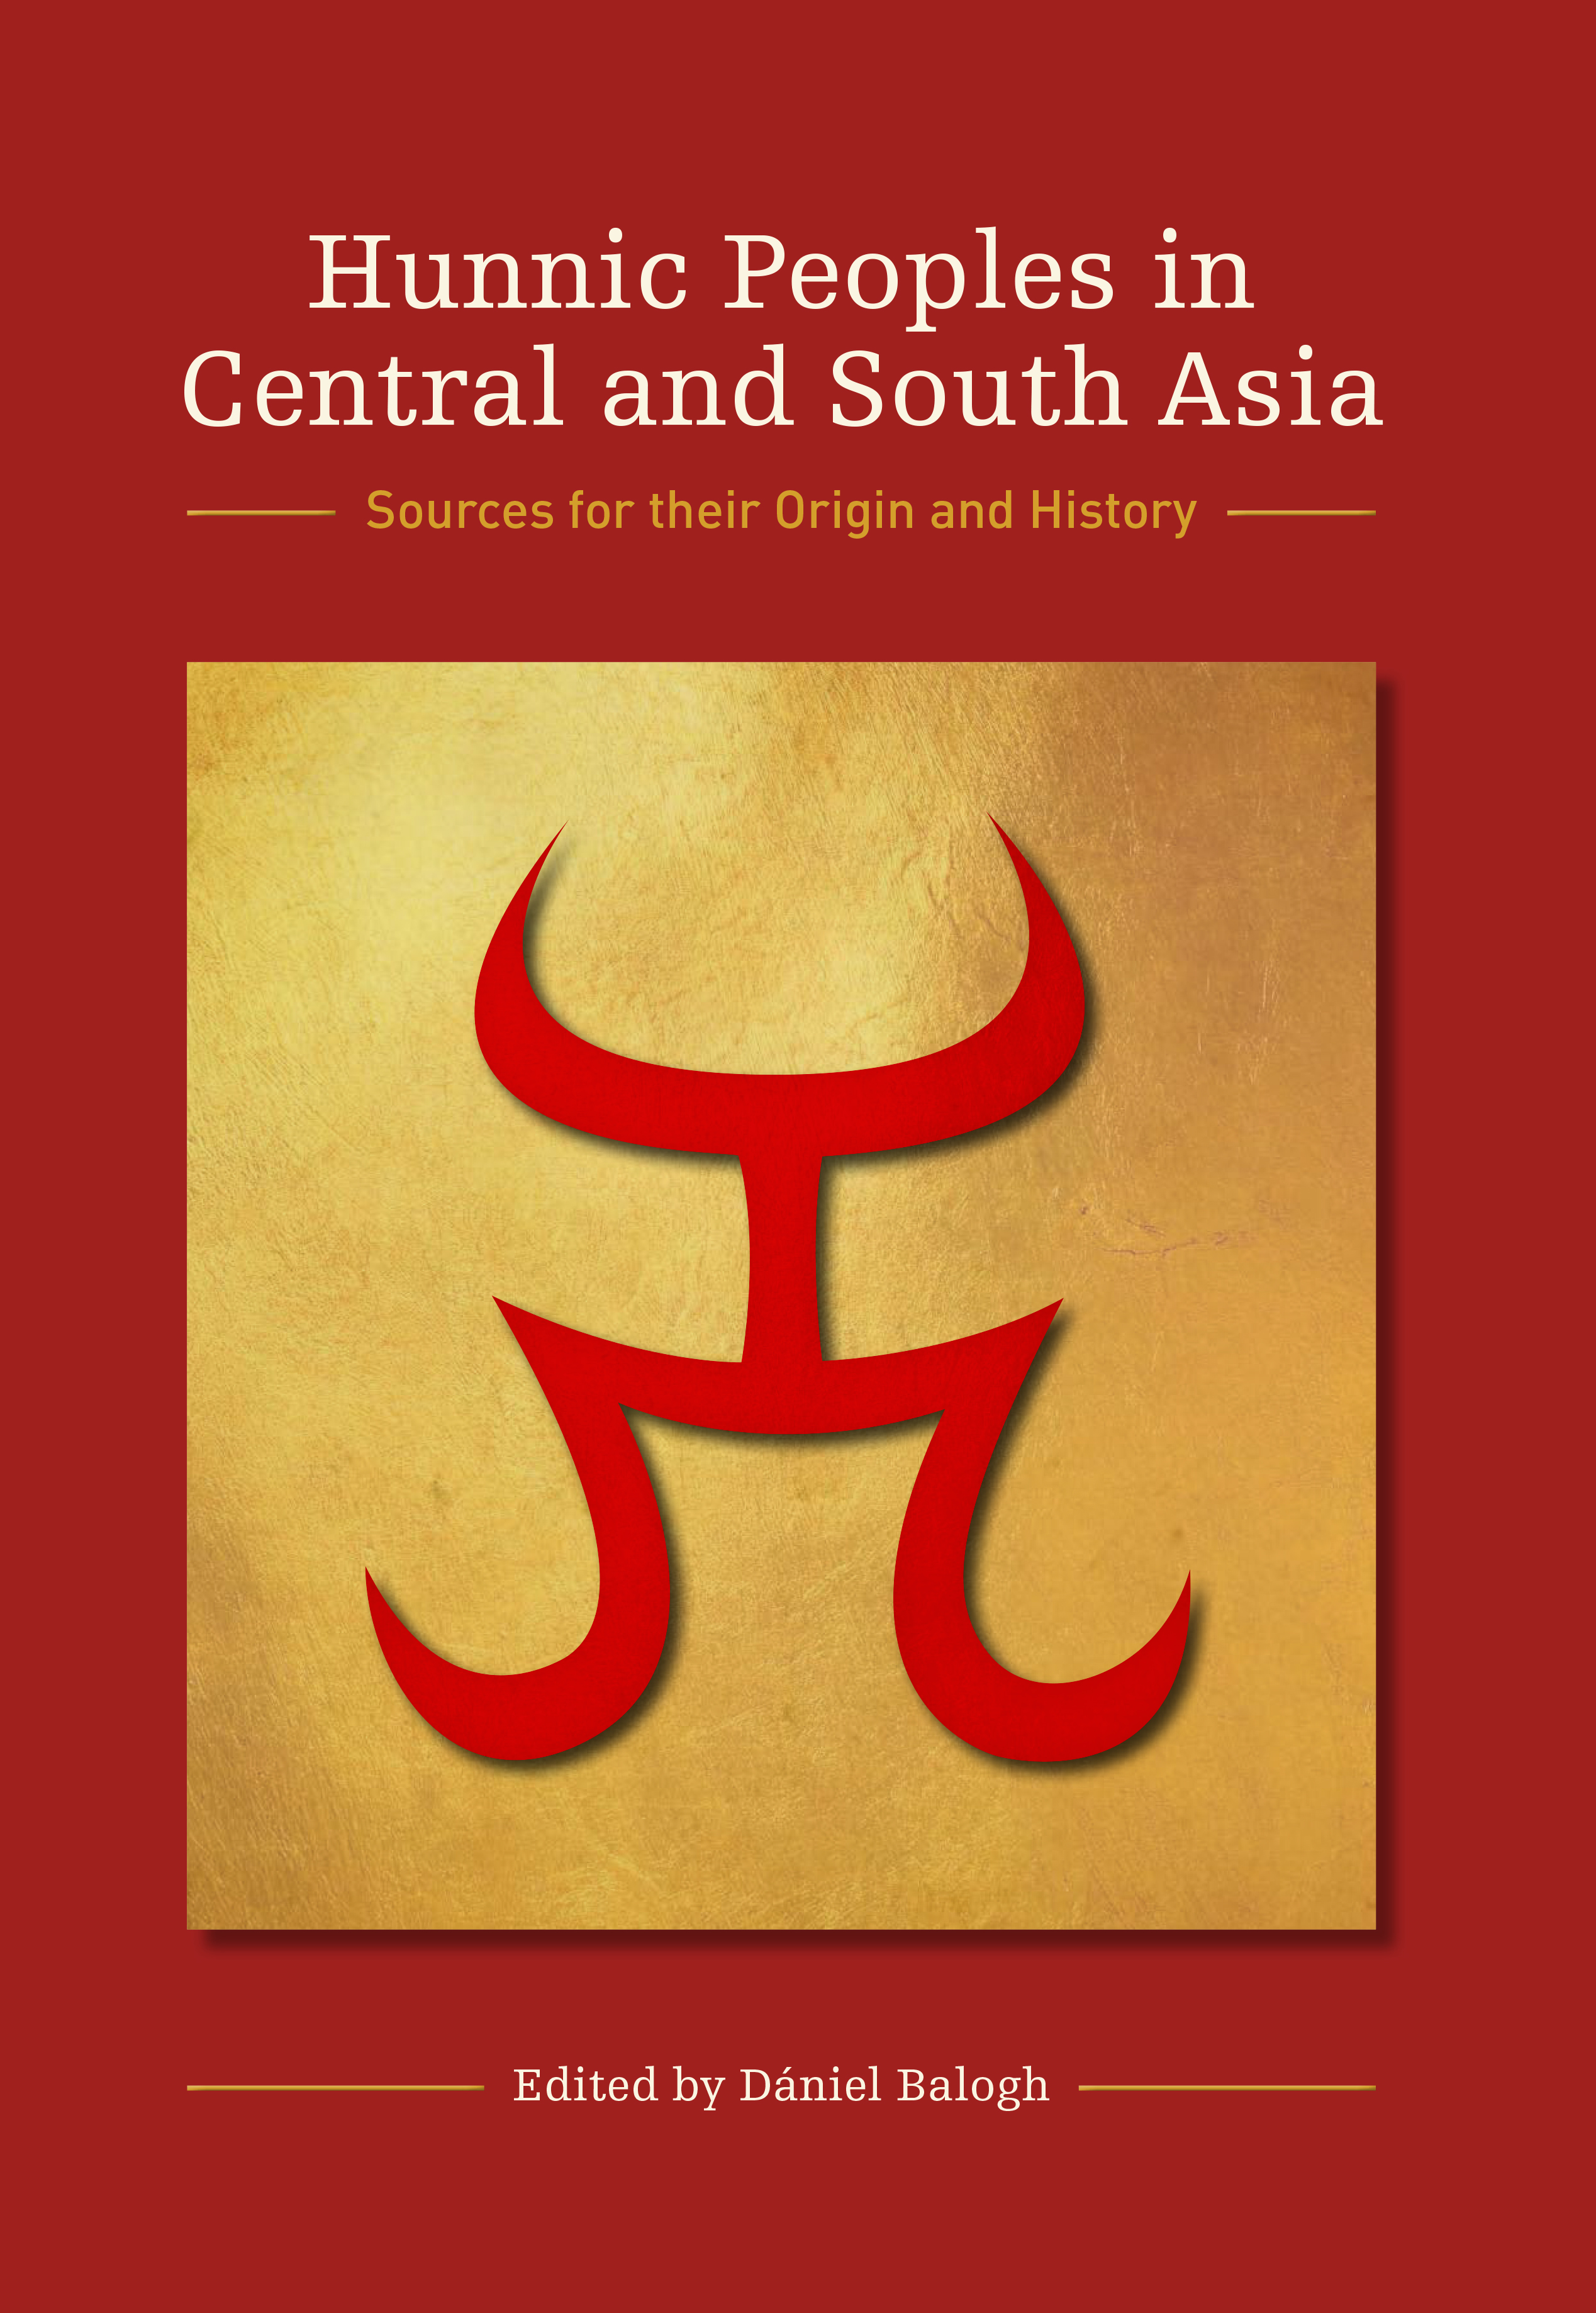 Hunnic Peoples in Central and South Asia - 50-99.99